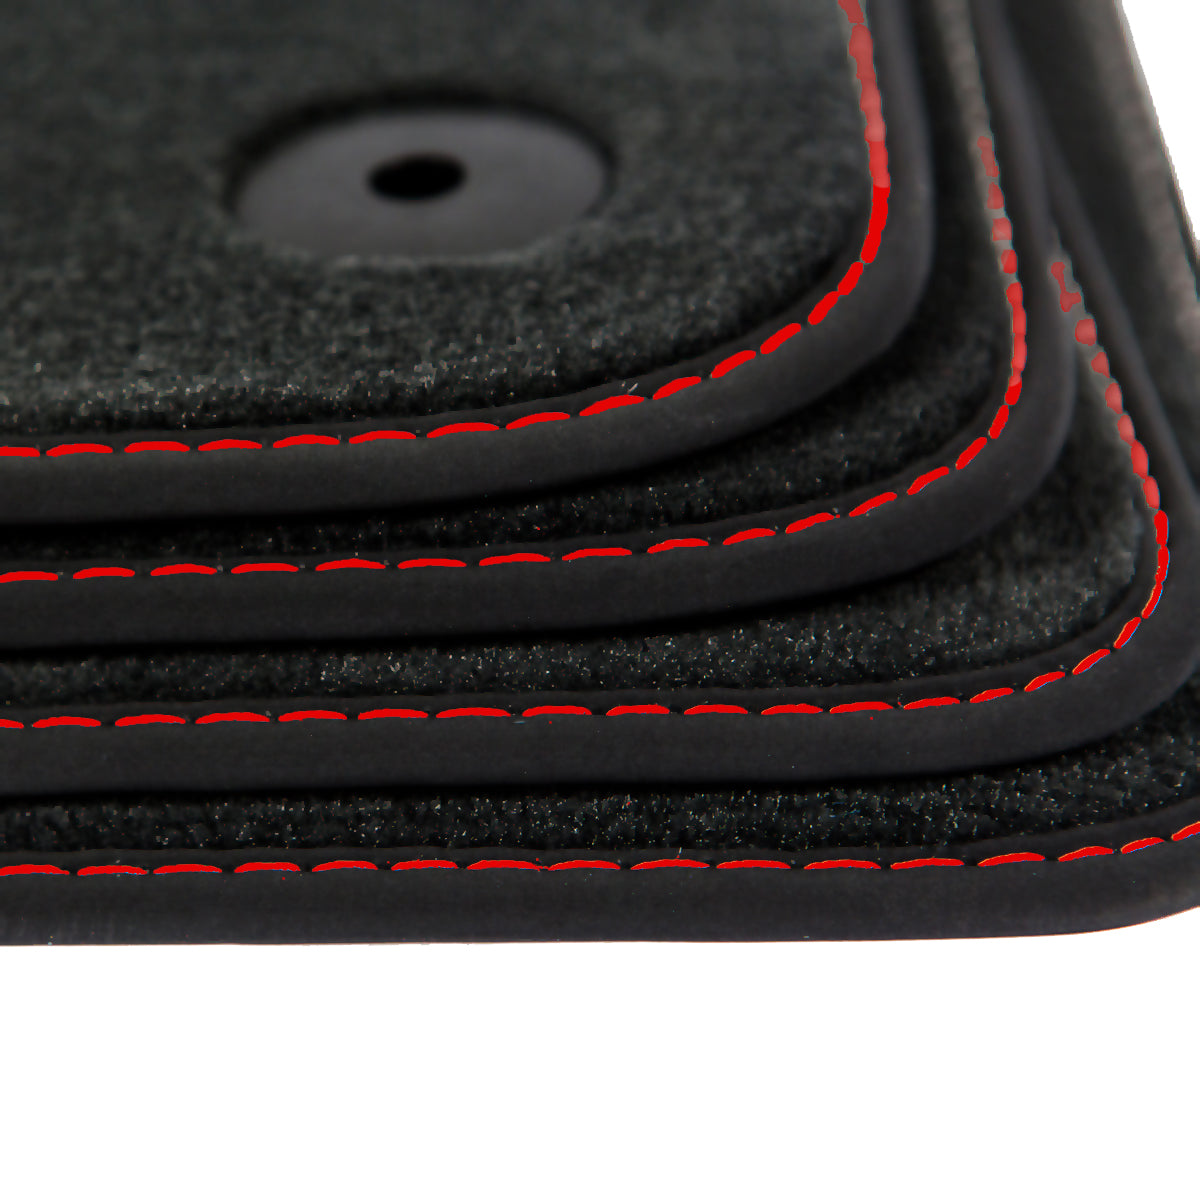 Audi A5 & S5 Floor Mats - Convertible F57 - Red Stitching